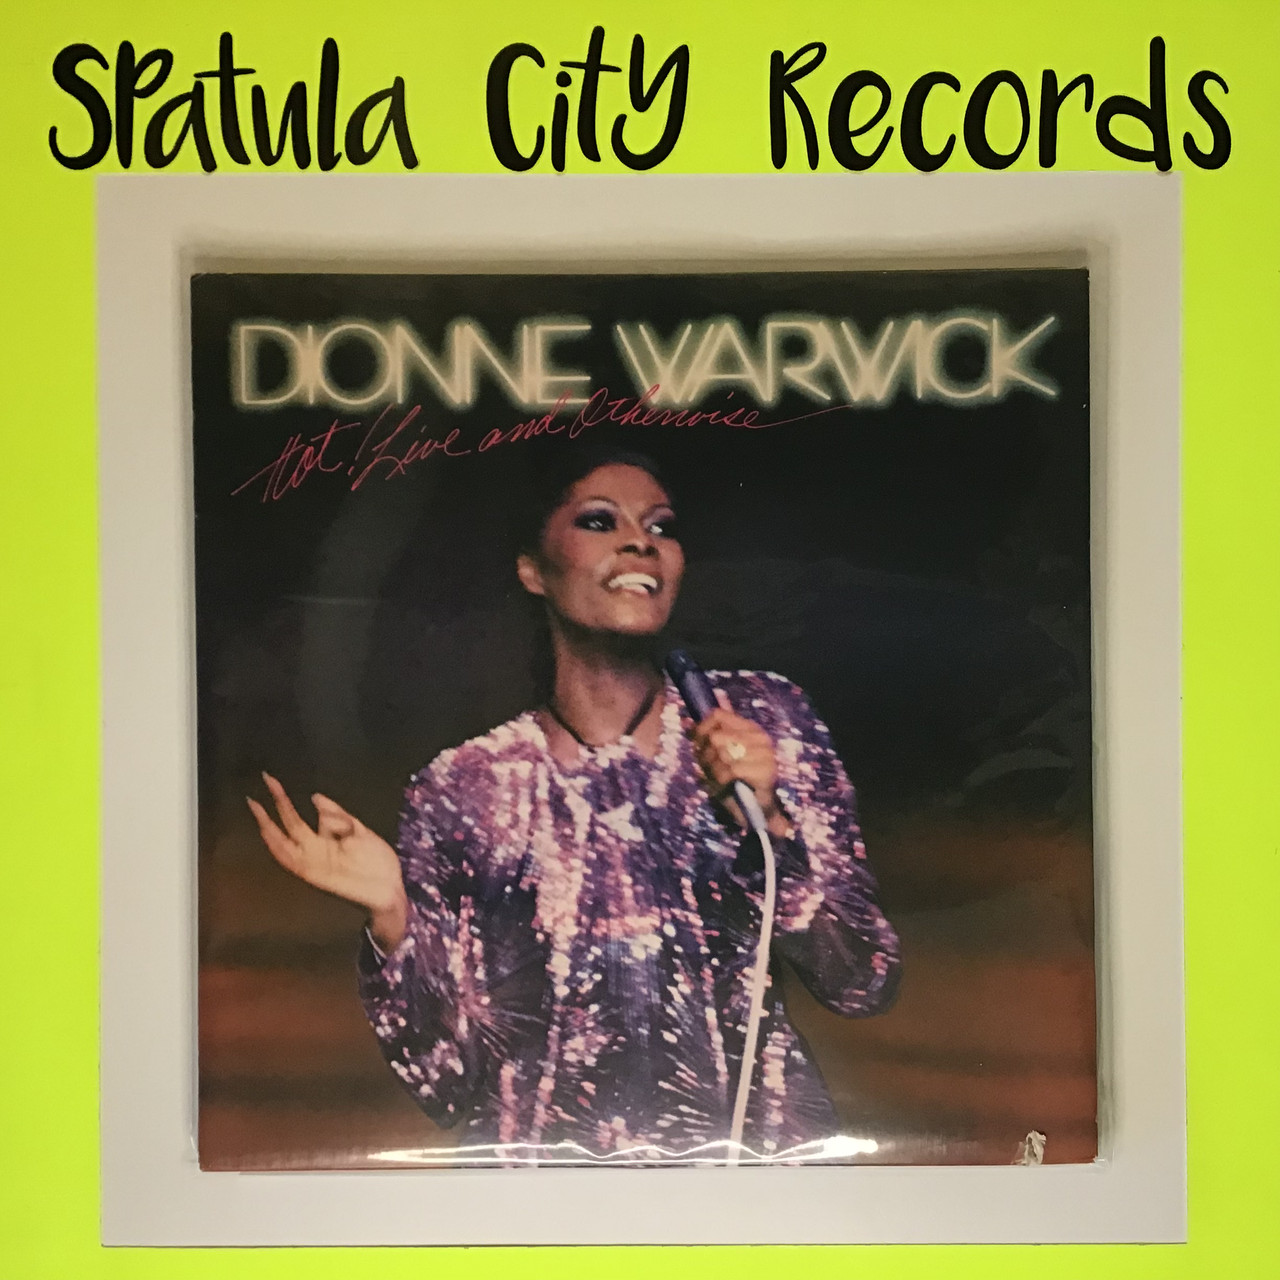 Dionne Warwick - Hot! Live and Otherwise - double vinyl record album LP